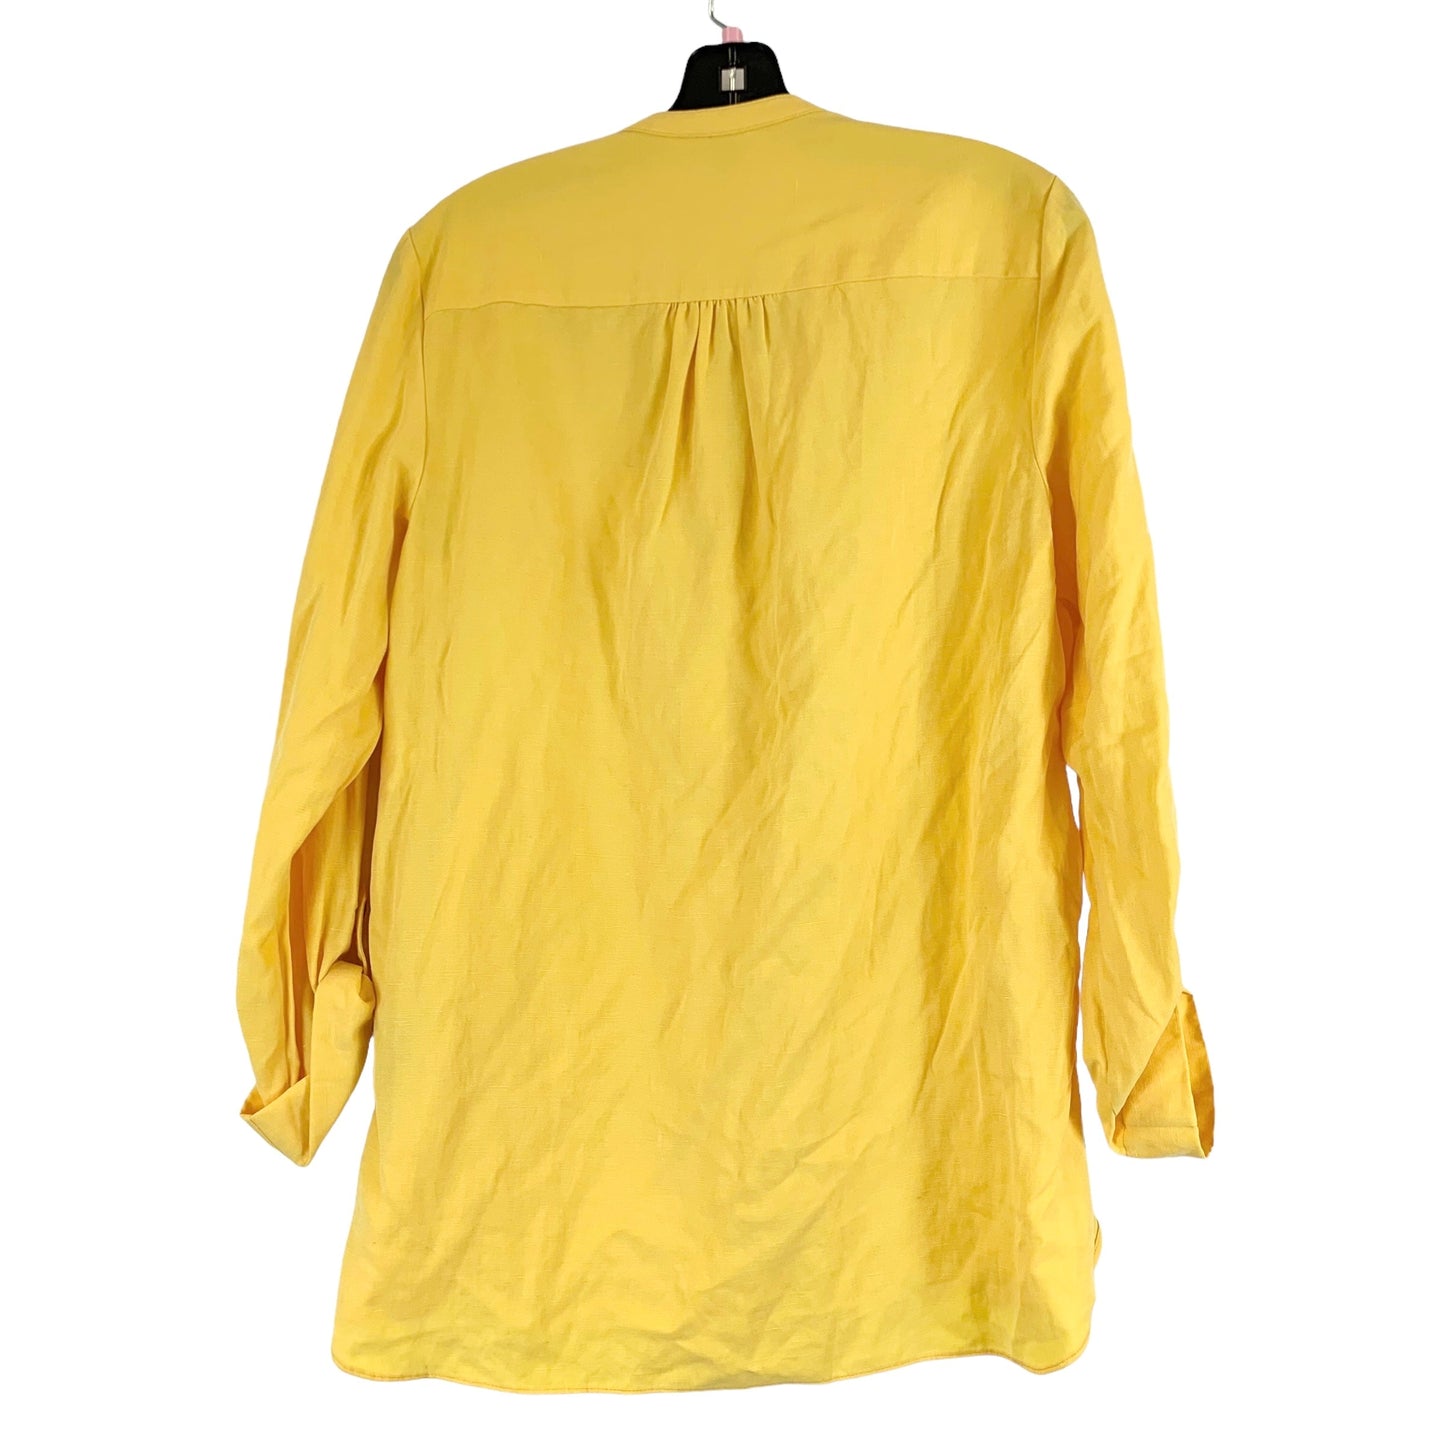 Yellow Tunic Long Sleeve Anne Klein, Size M